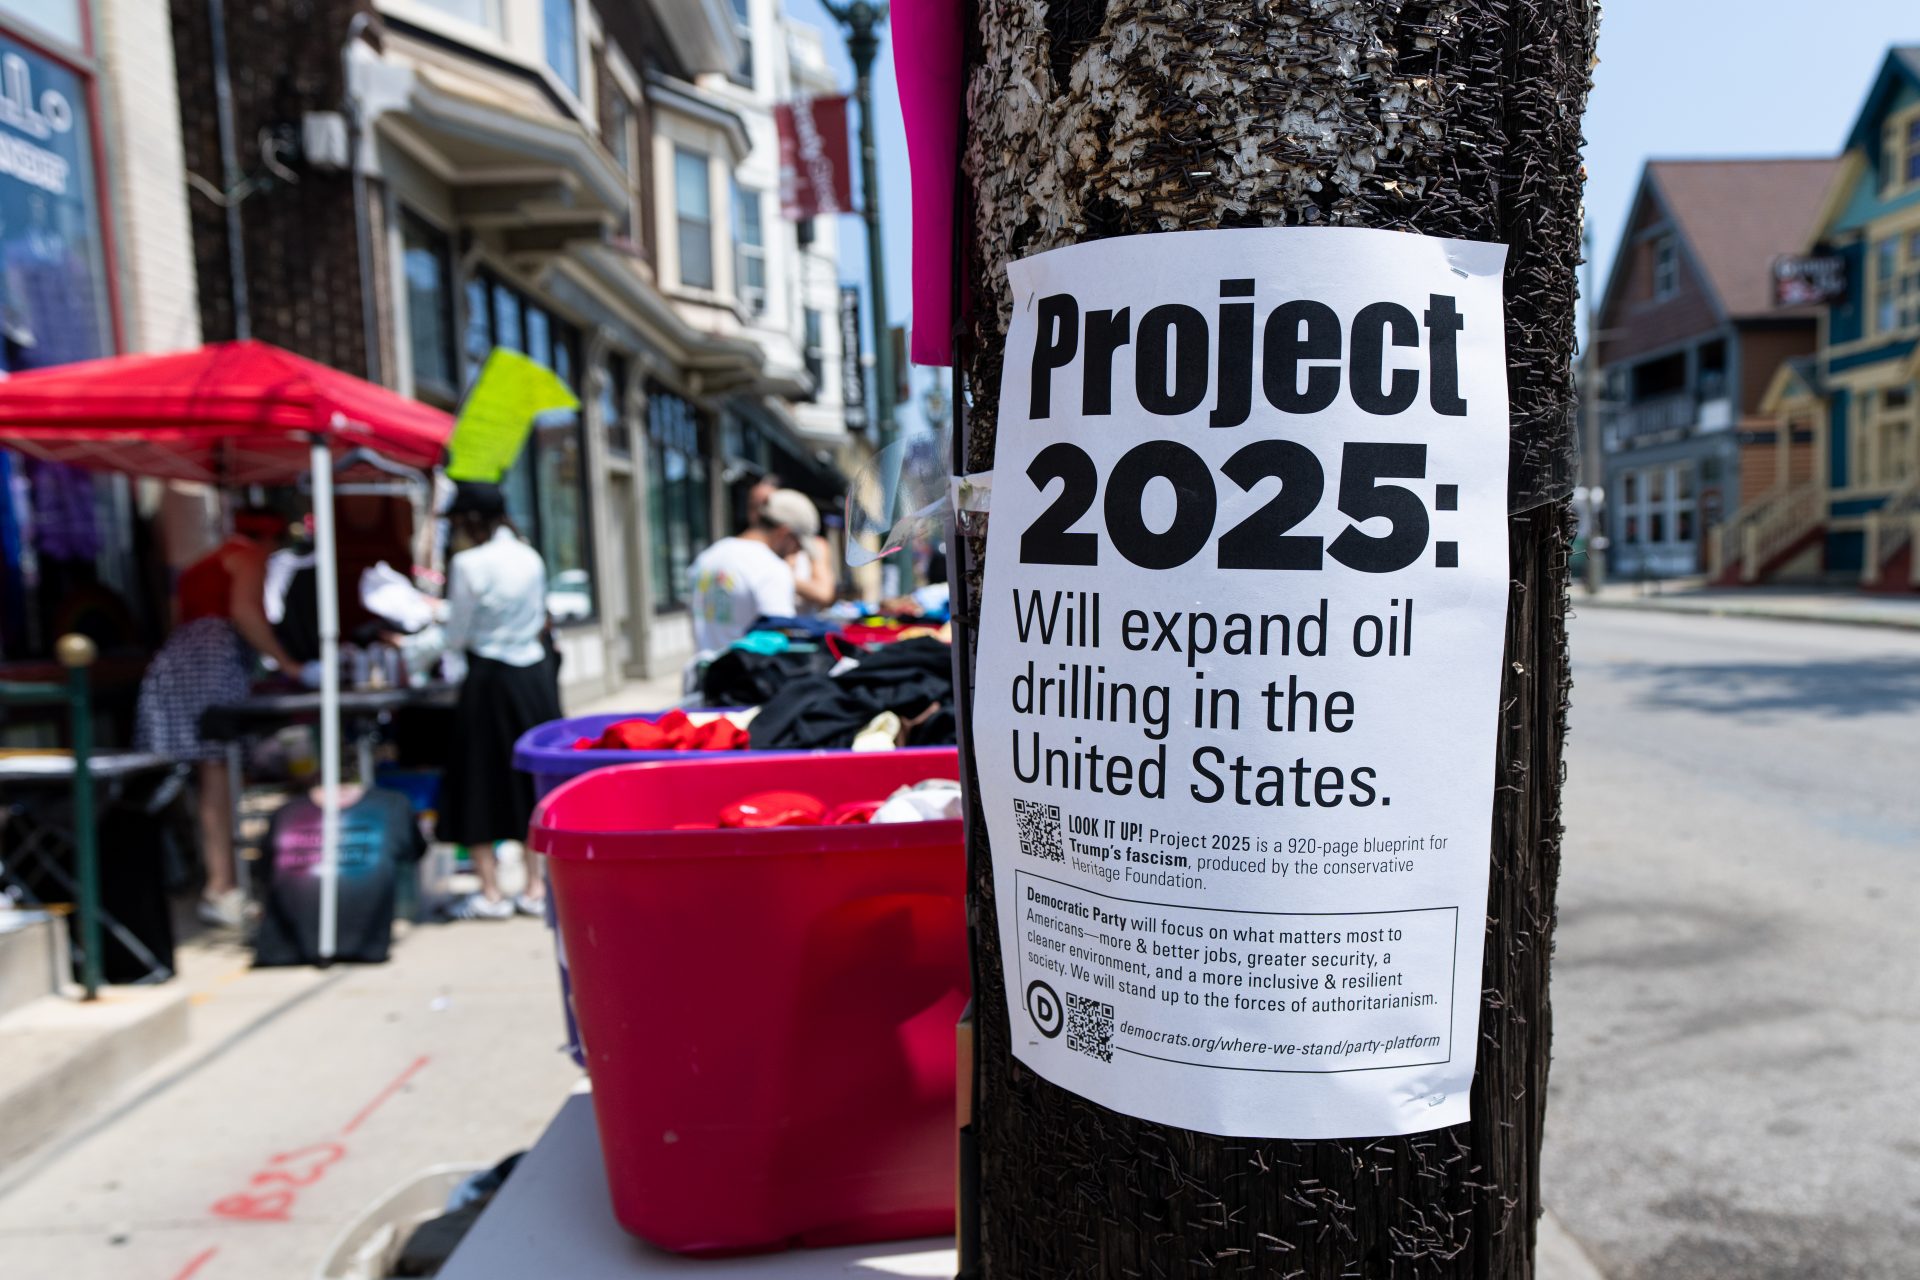 How would Project 2025 hurt Canada?